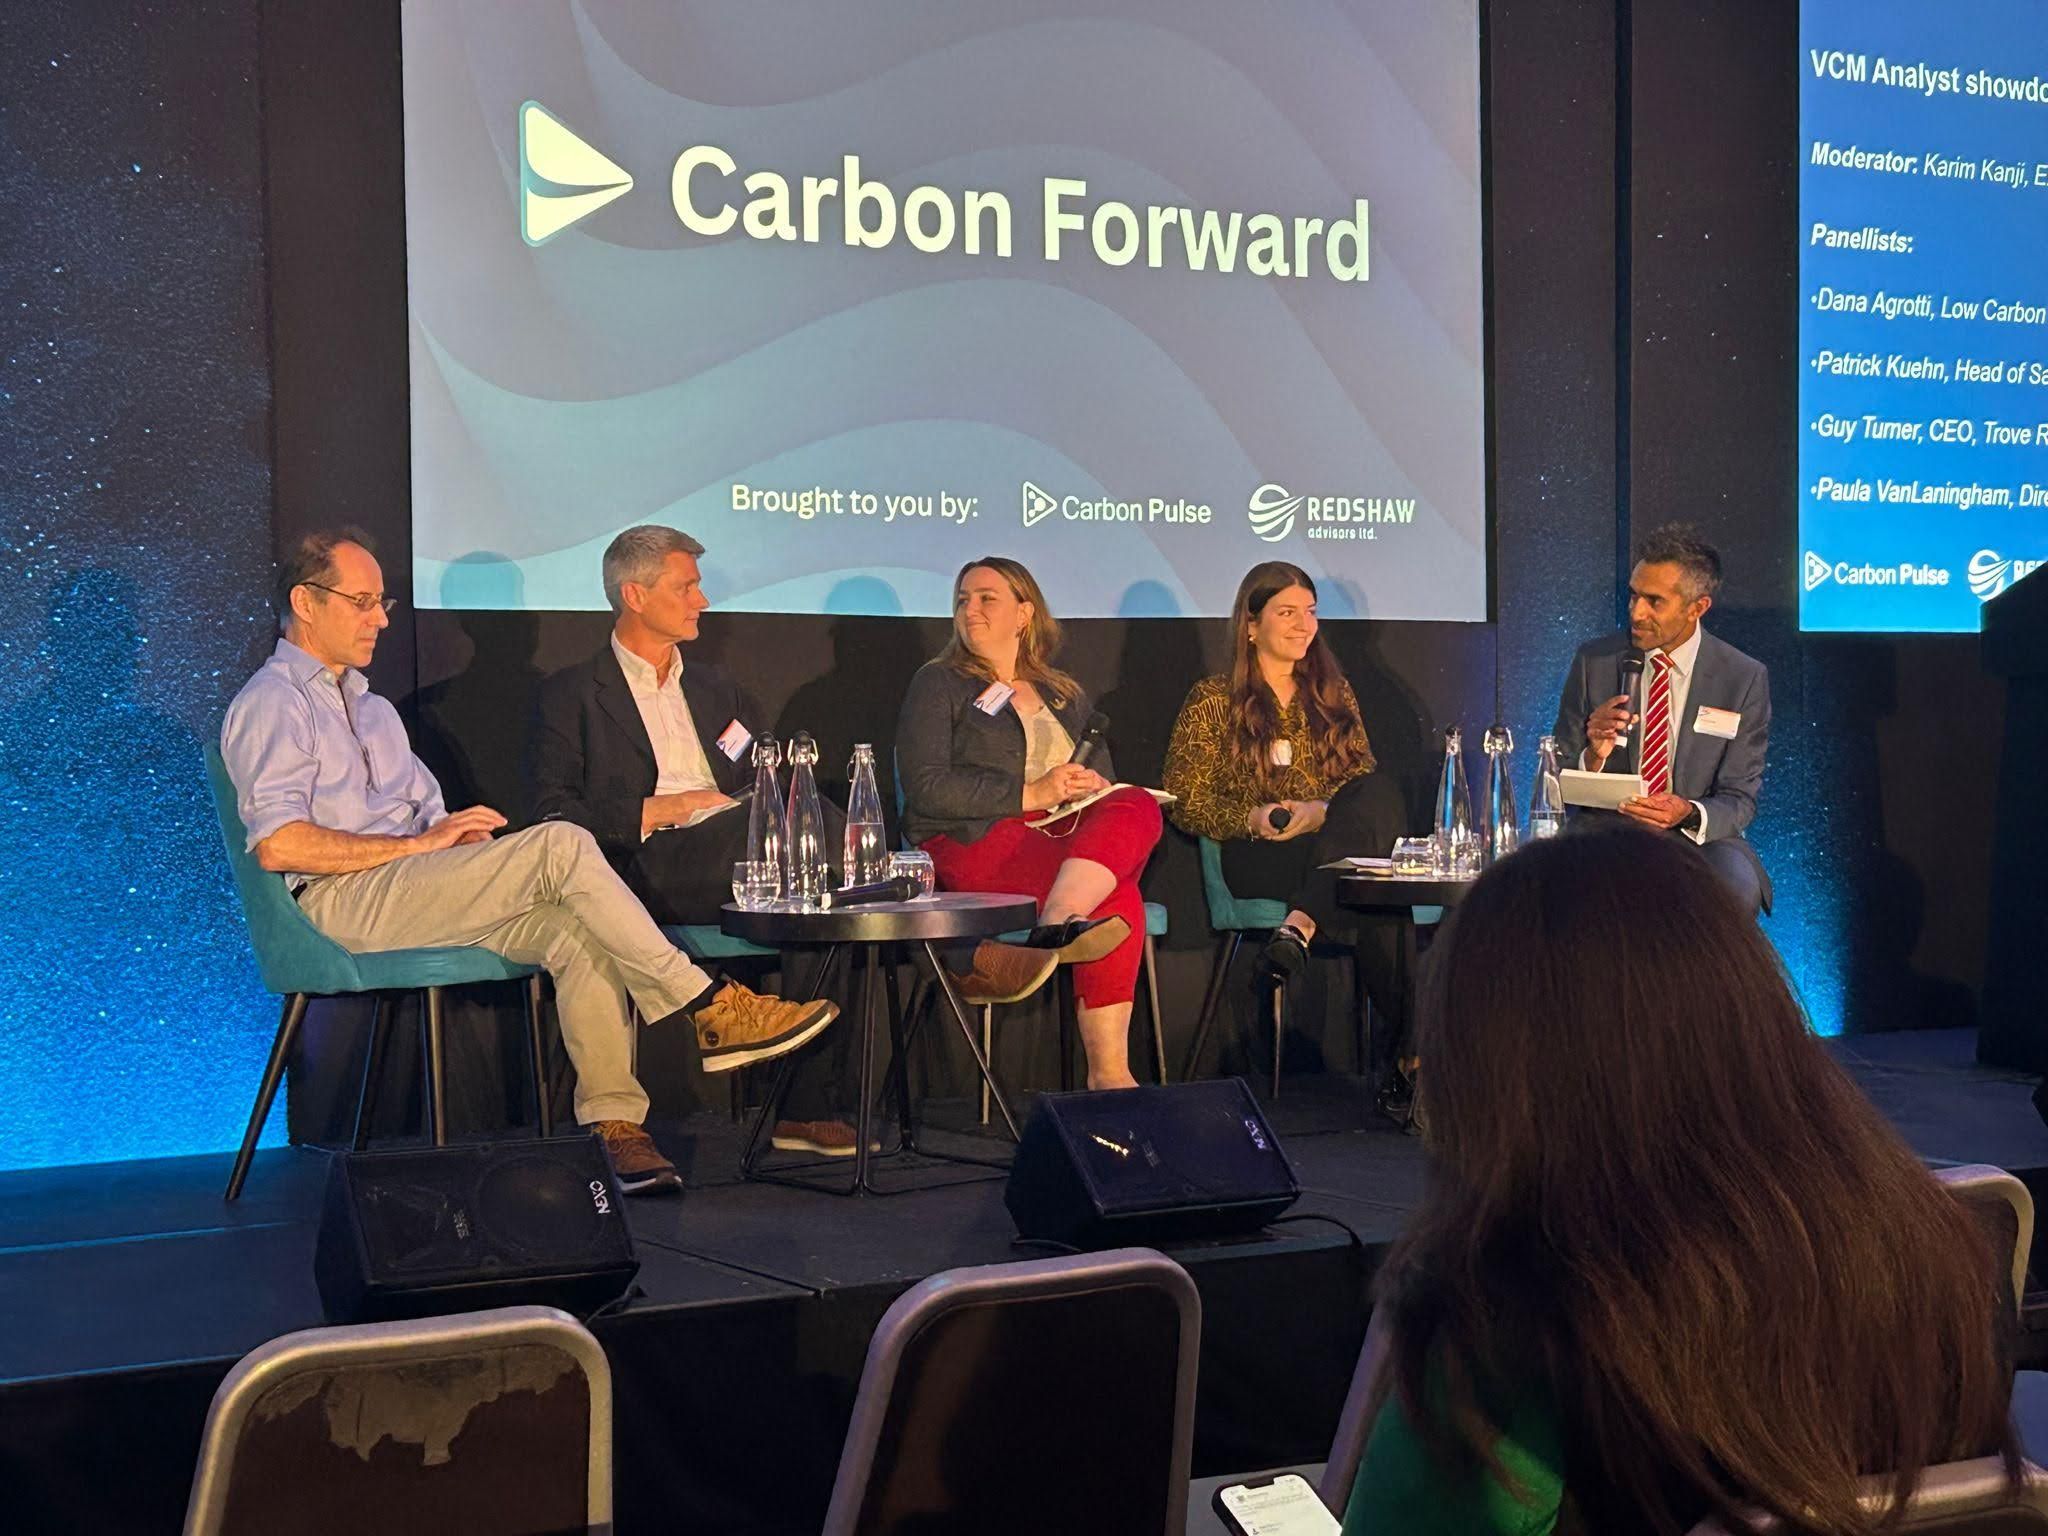 Insights from the Carbon Forward: Latest Trends and Highlights